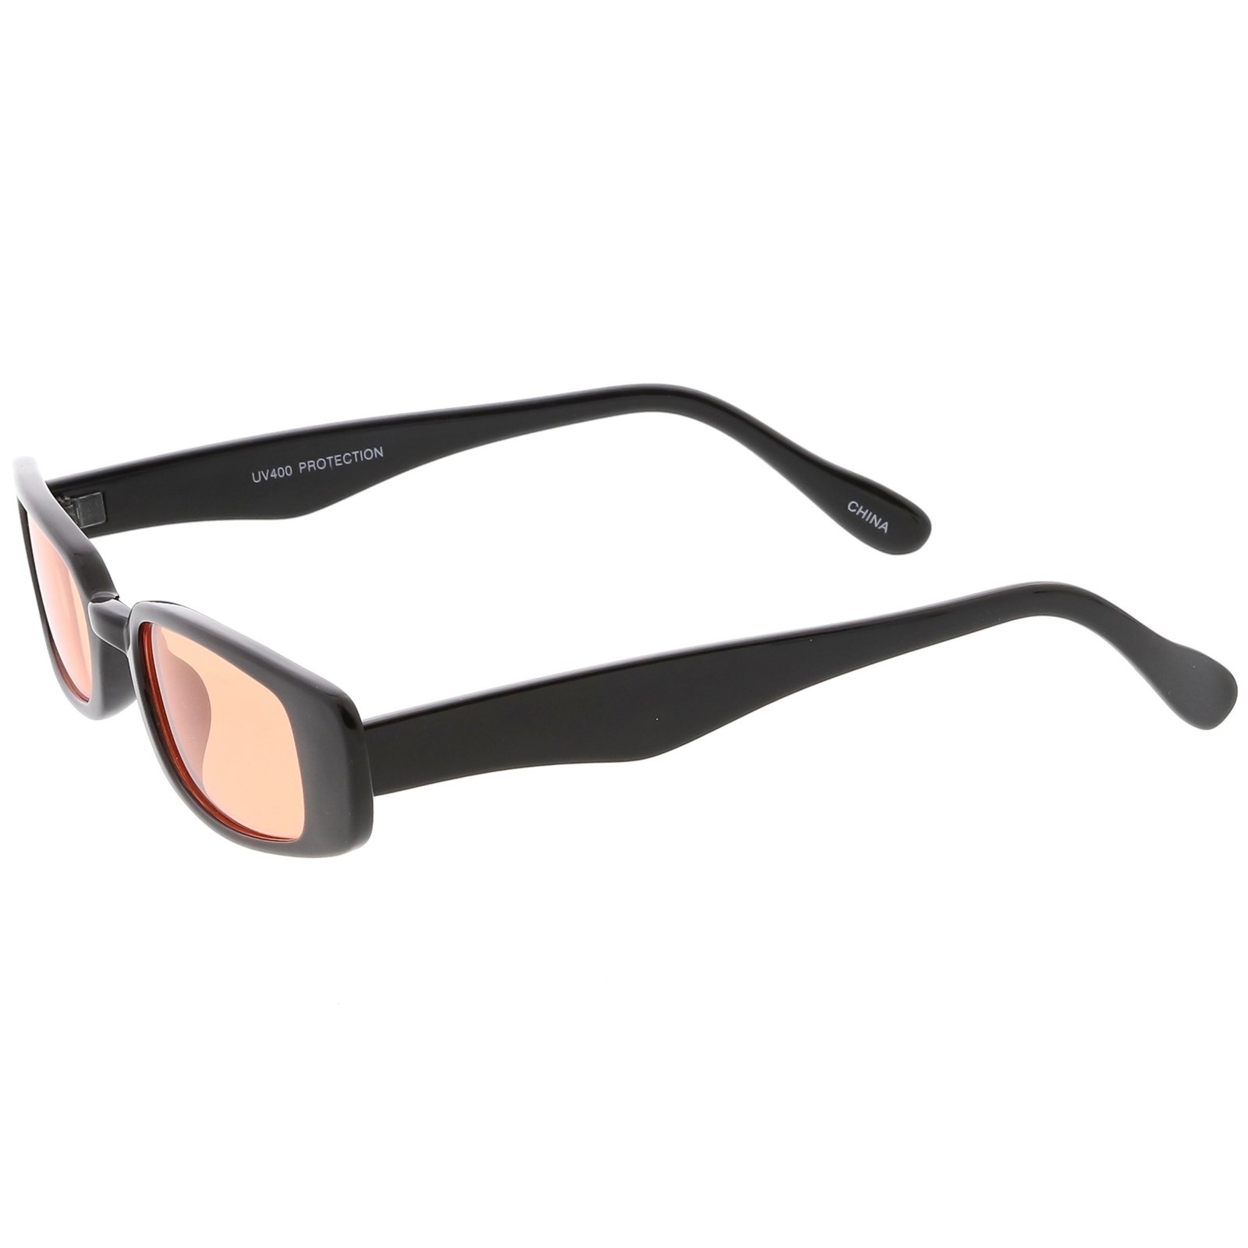 Extreme Thin Small Lens Rectangle Sunglasses Color Tinted 49mm - Black / Pink